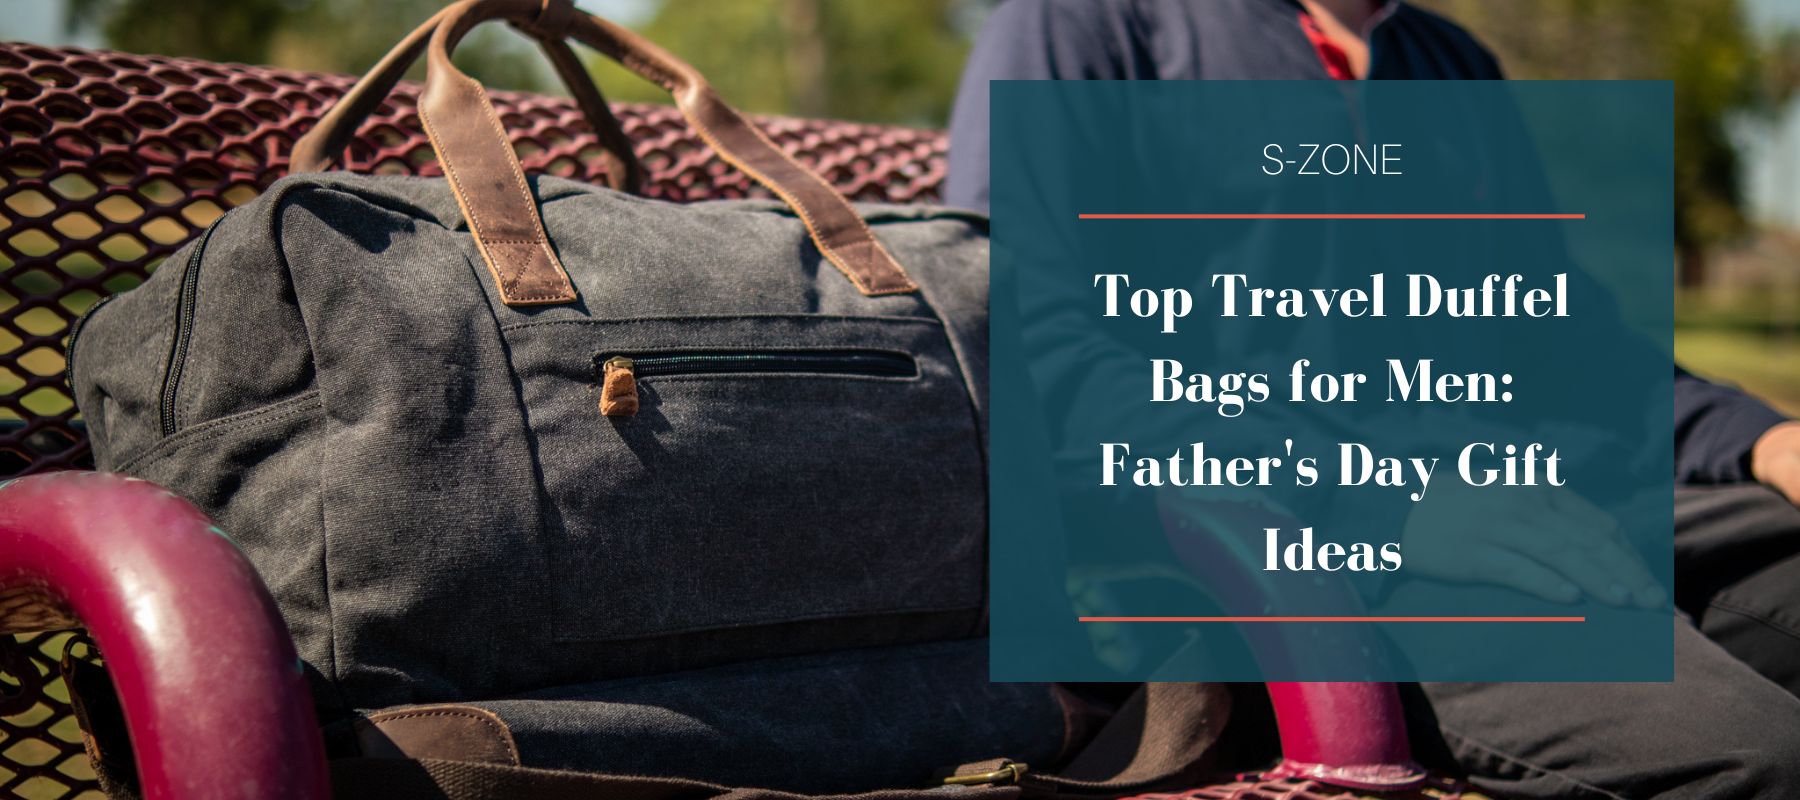 Top Travel Duffel Bags for Men: Father's Day Gift Ideas